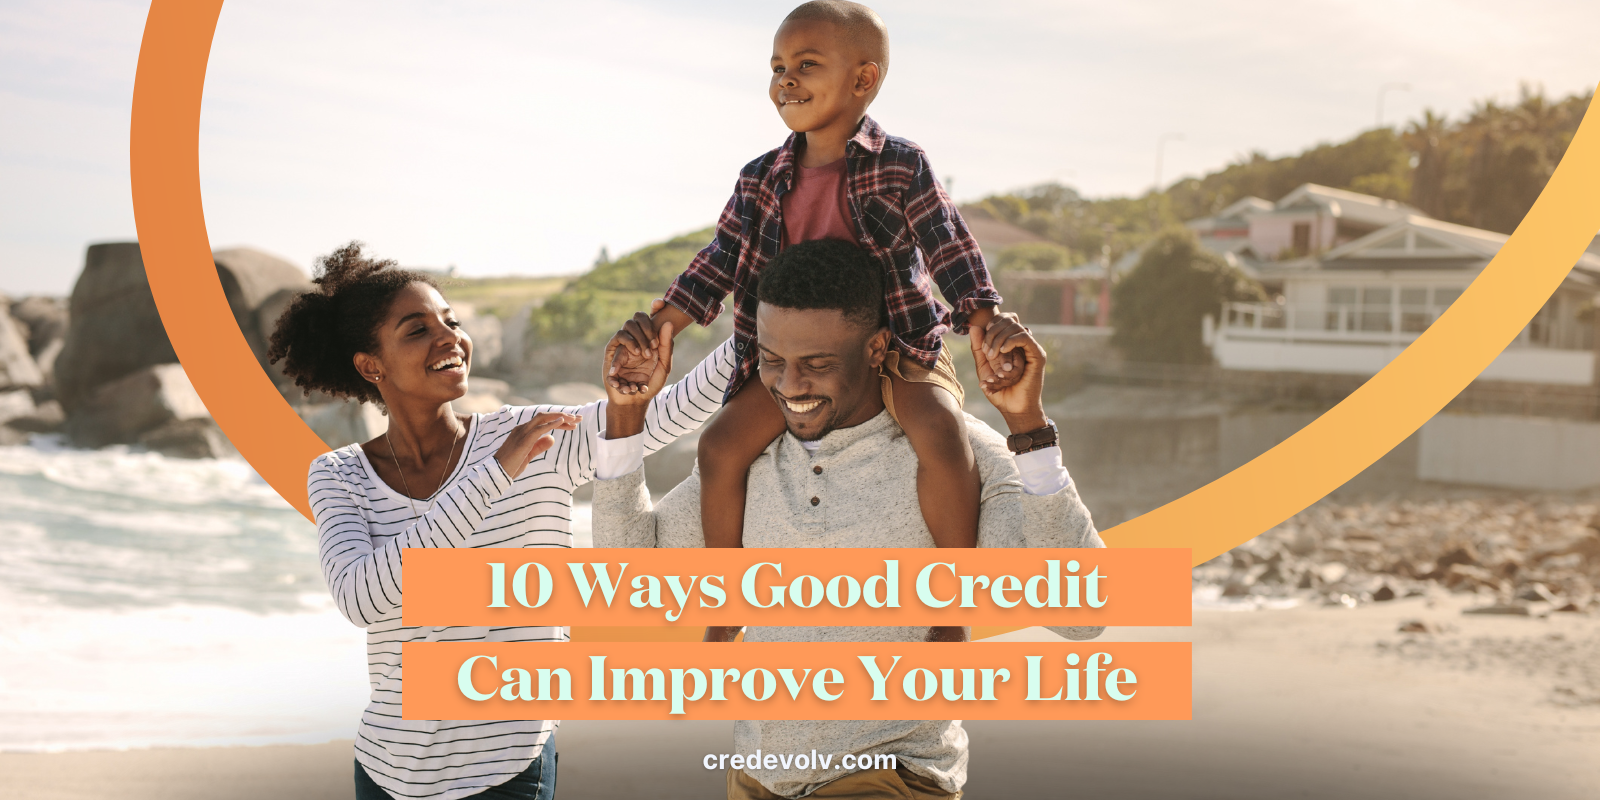 CredEvolv Blog - Featured Image - 10 Ways Good Credit Can Improve Your Life